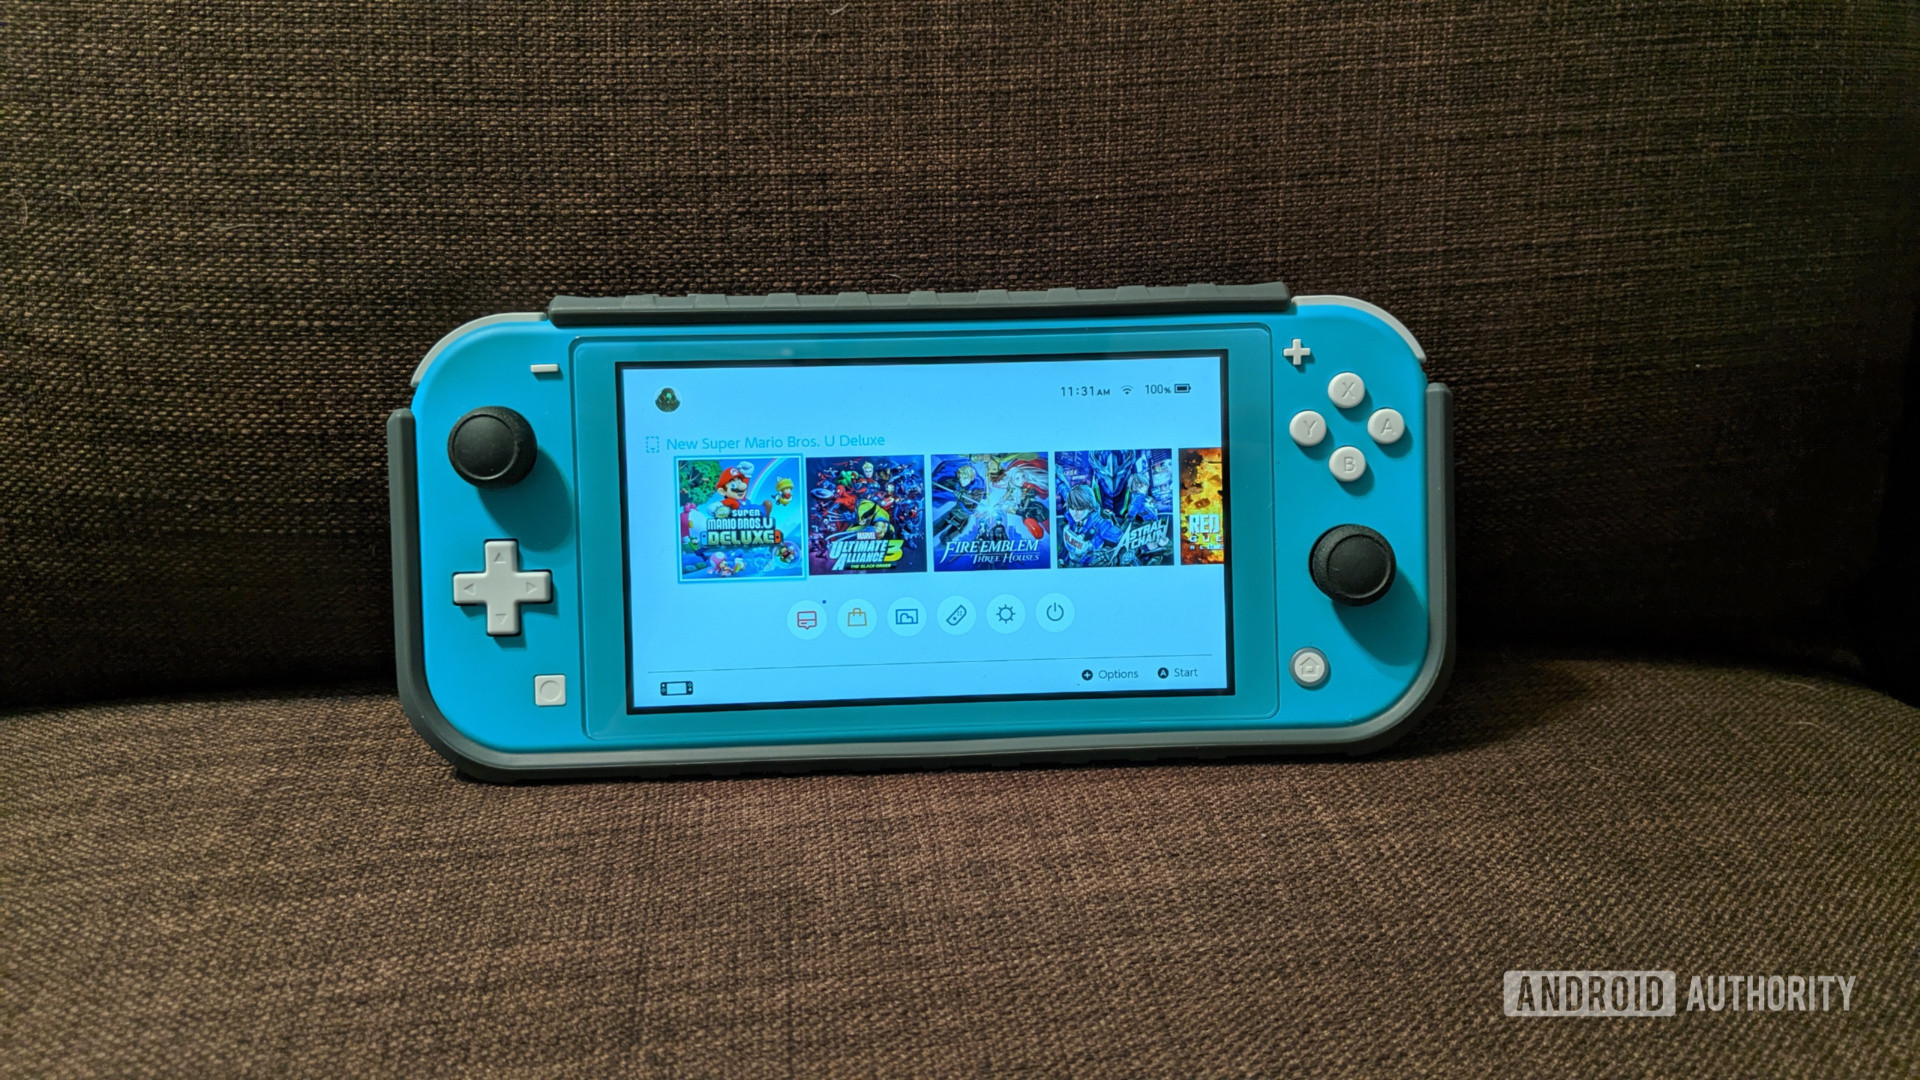 Nintendo Switch Lite on a sofa - one of the best travel gadgets